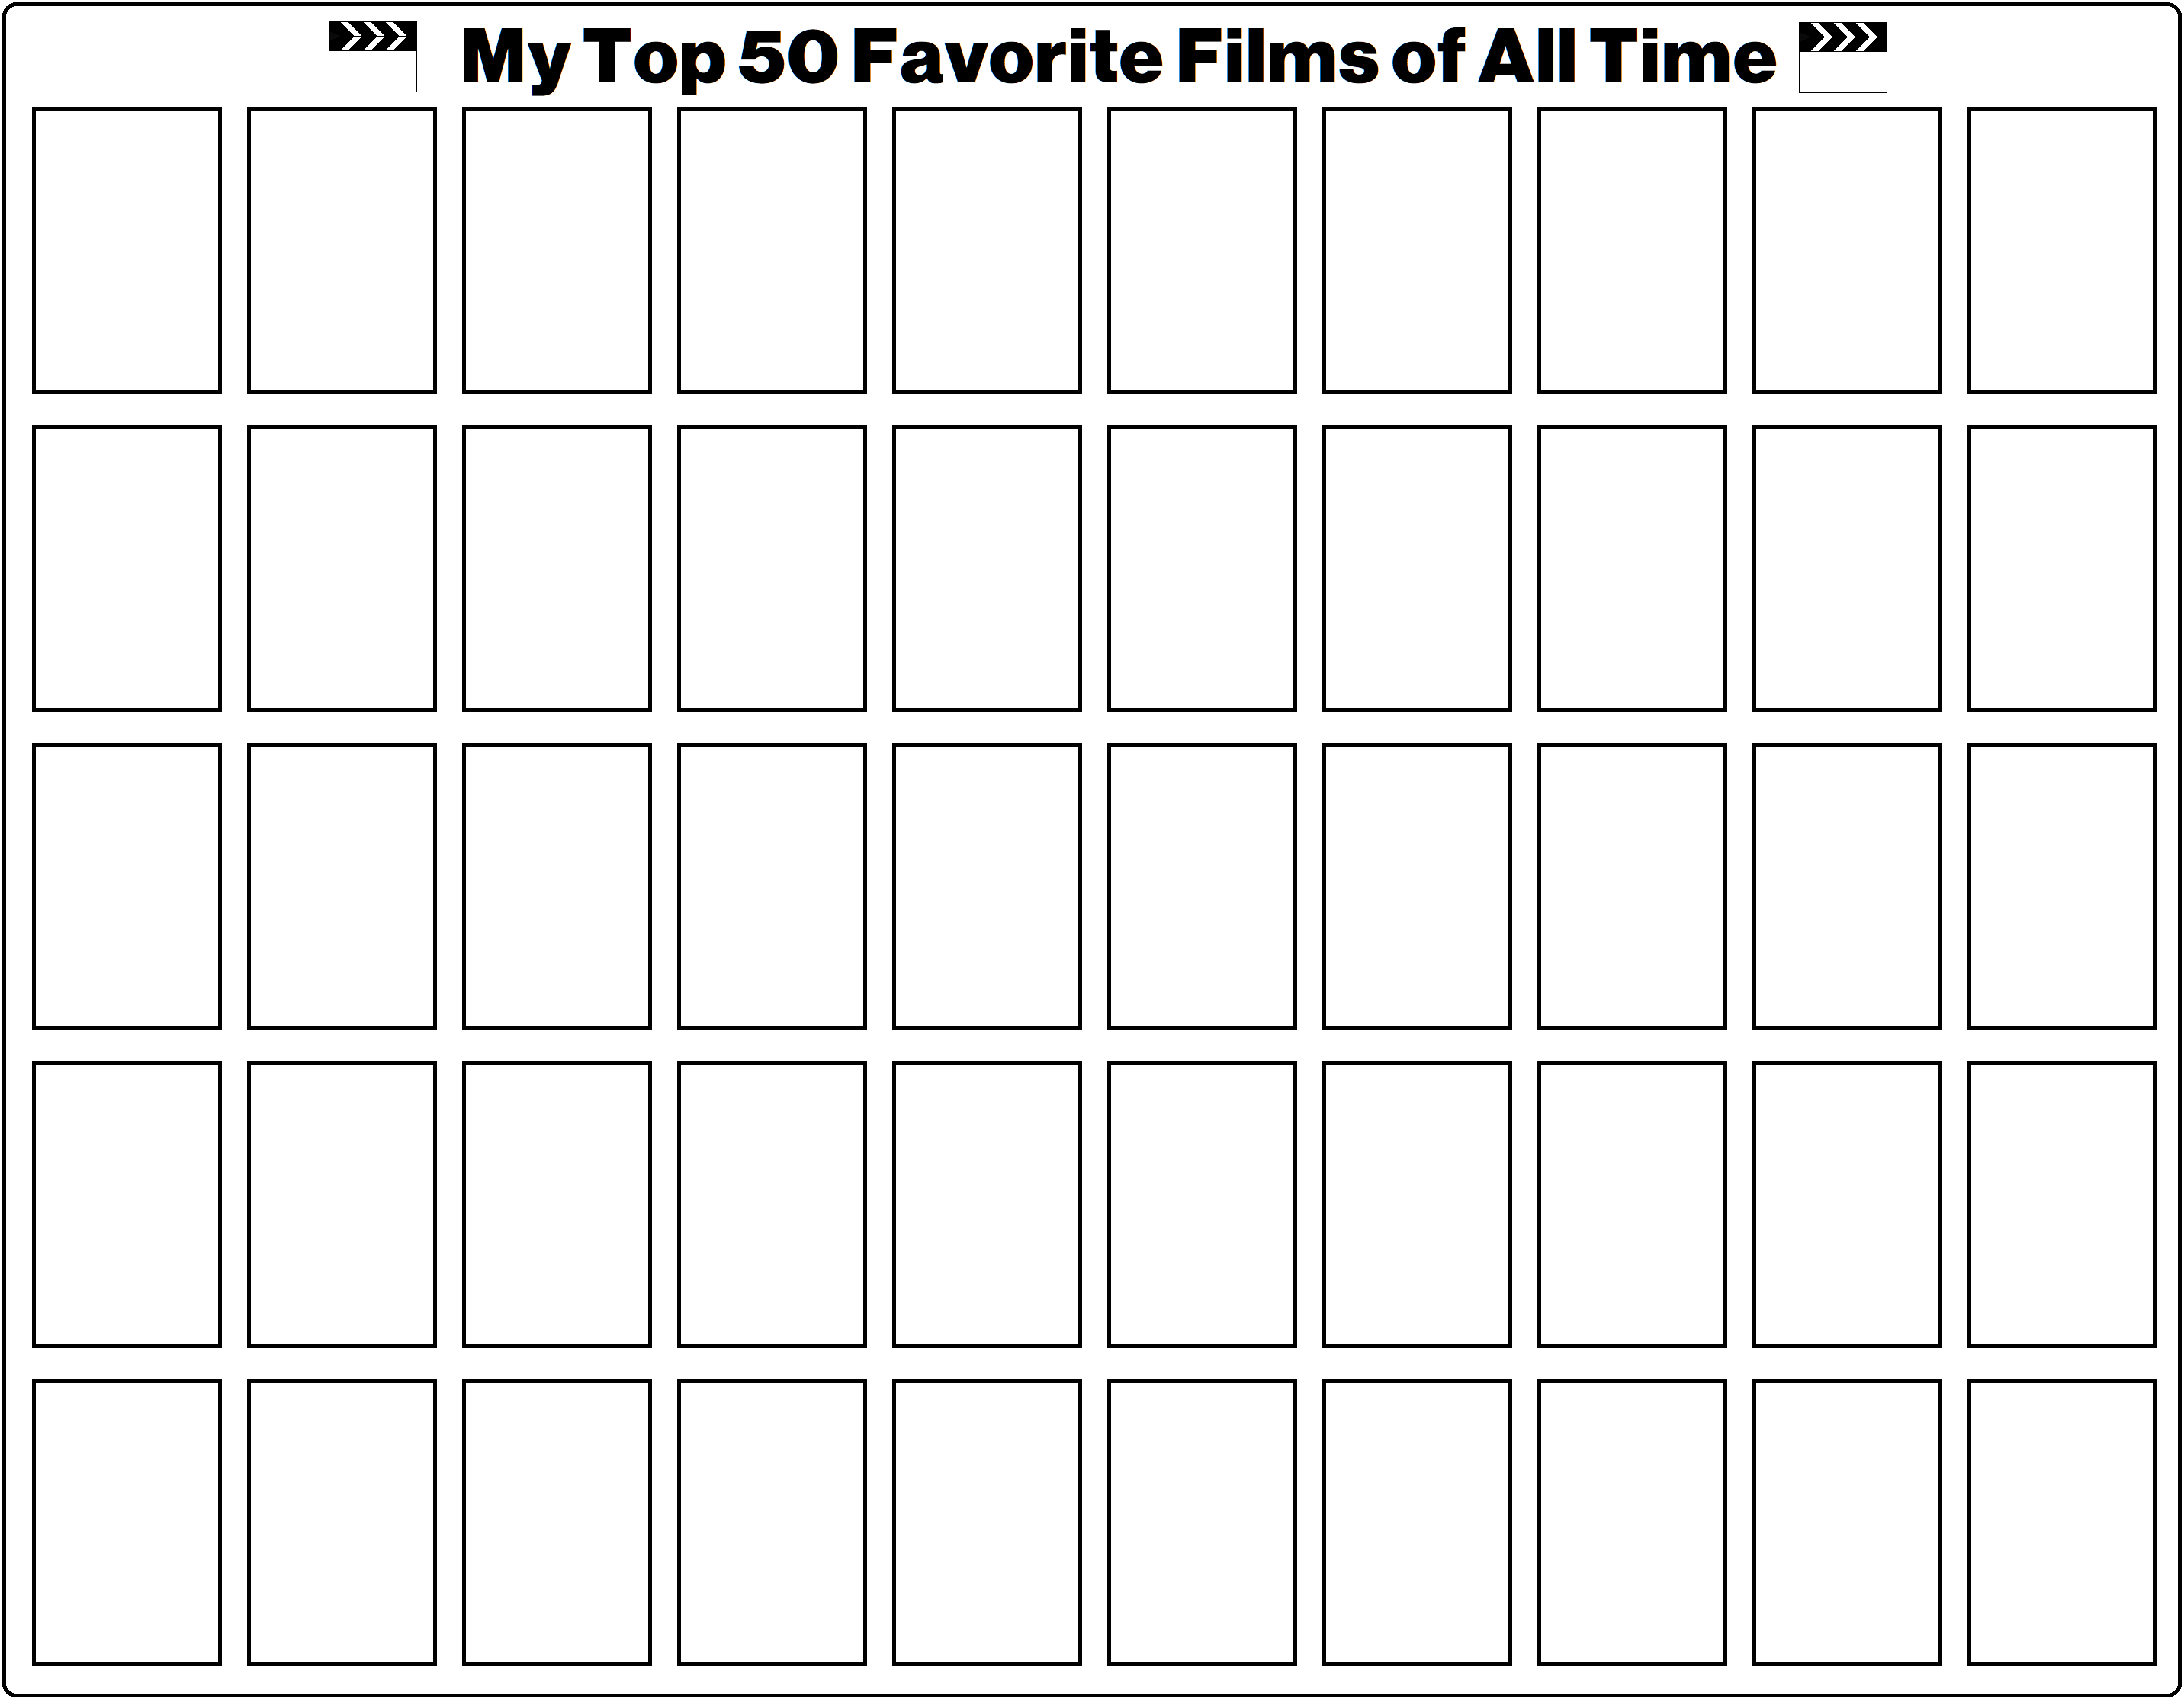 My Top 50 Favorite Films of All Time (BLANK) by Stephen-Fisher on ...